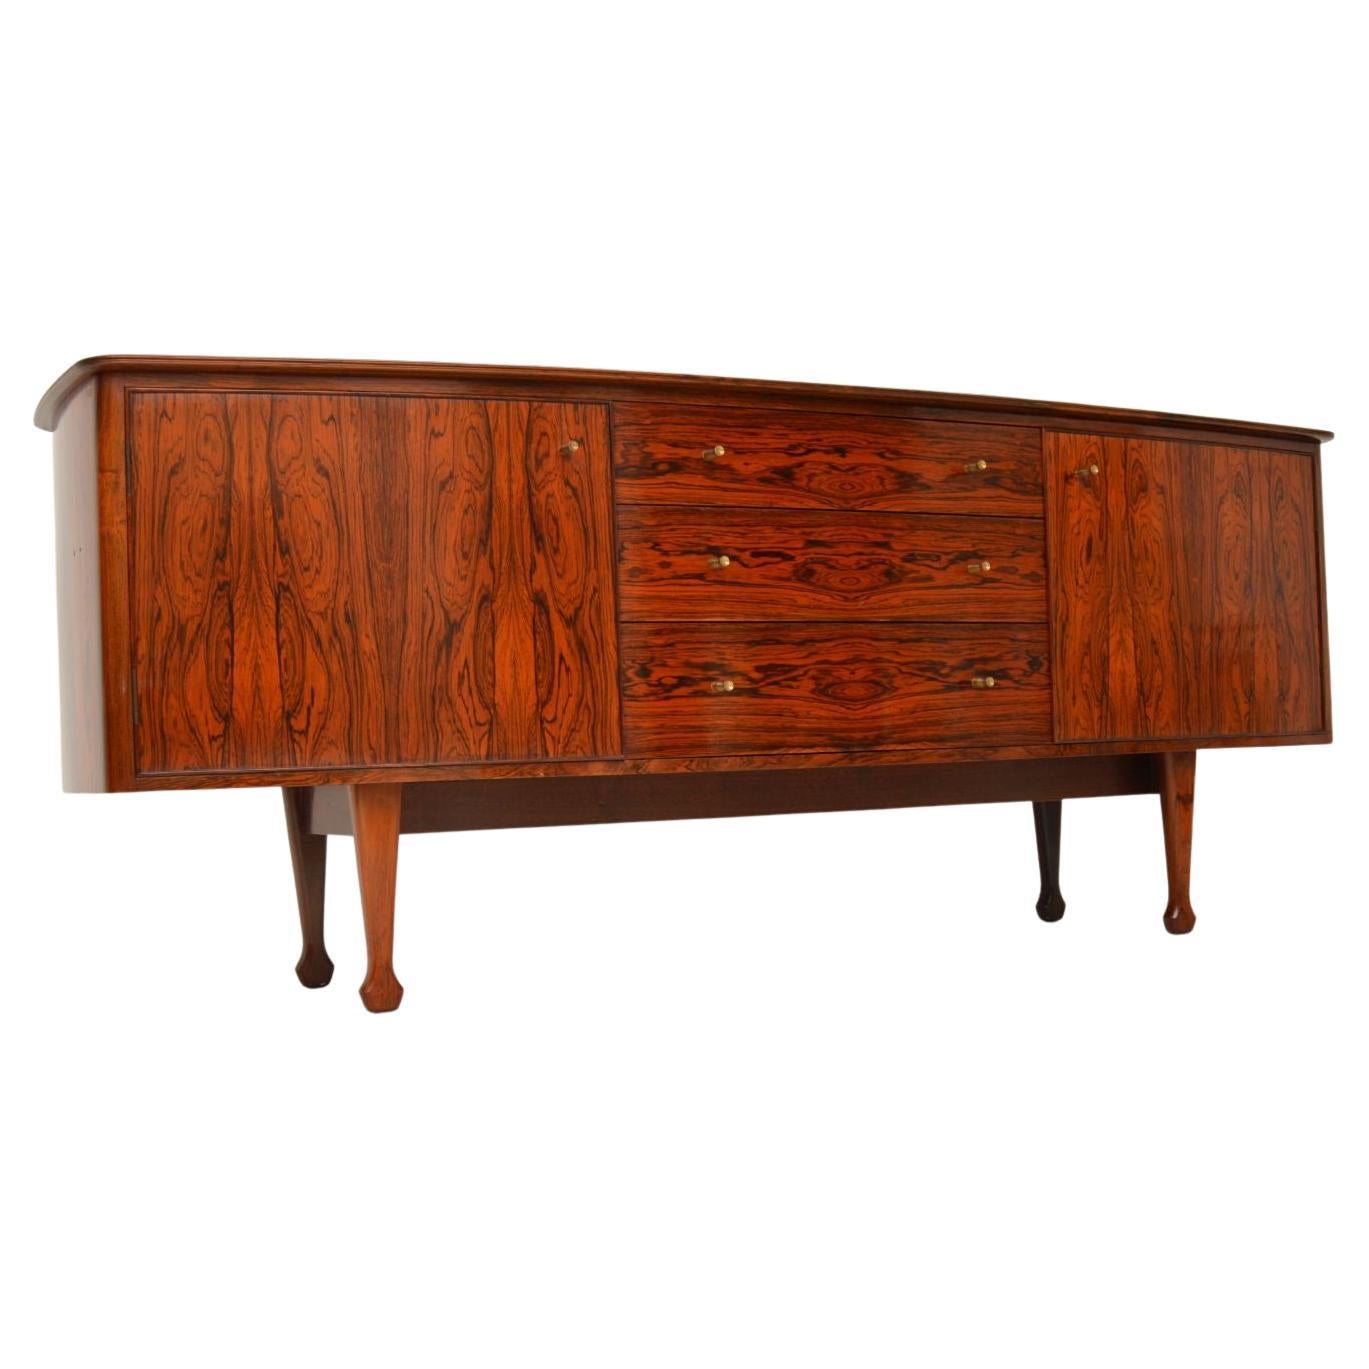 1950's Vintage Sideboard by a.J Milne for Heal's